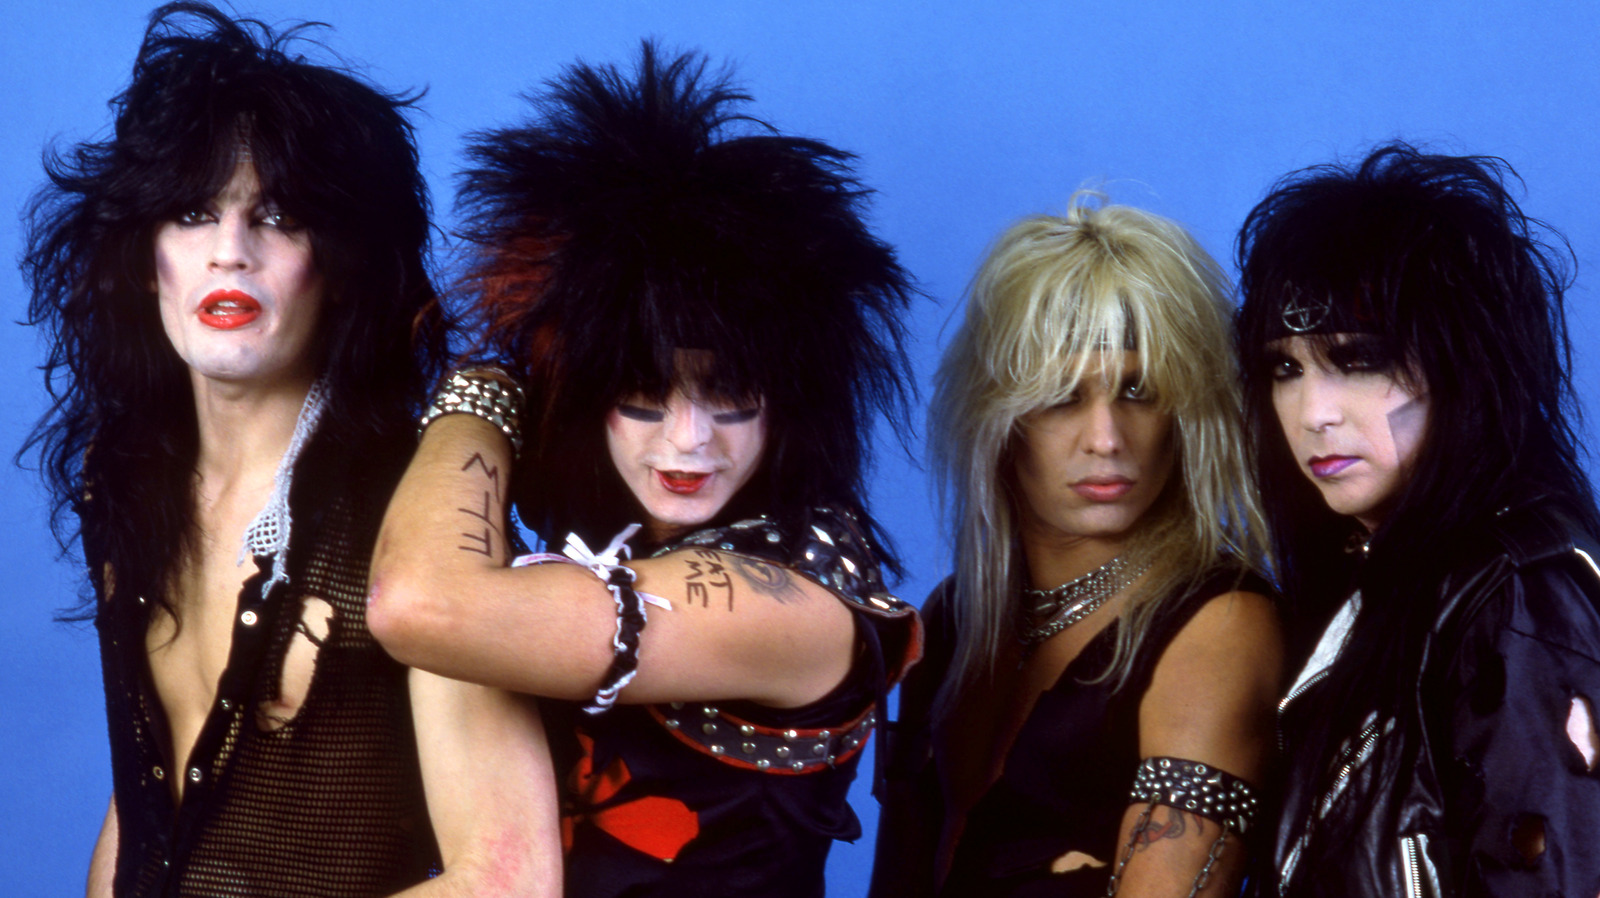 Whatever Happened To These Famous '80s Hair Bands?